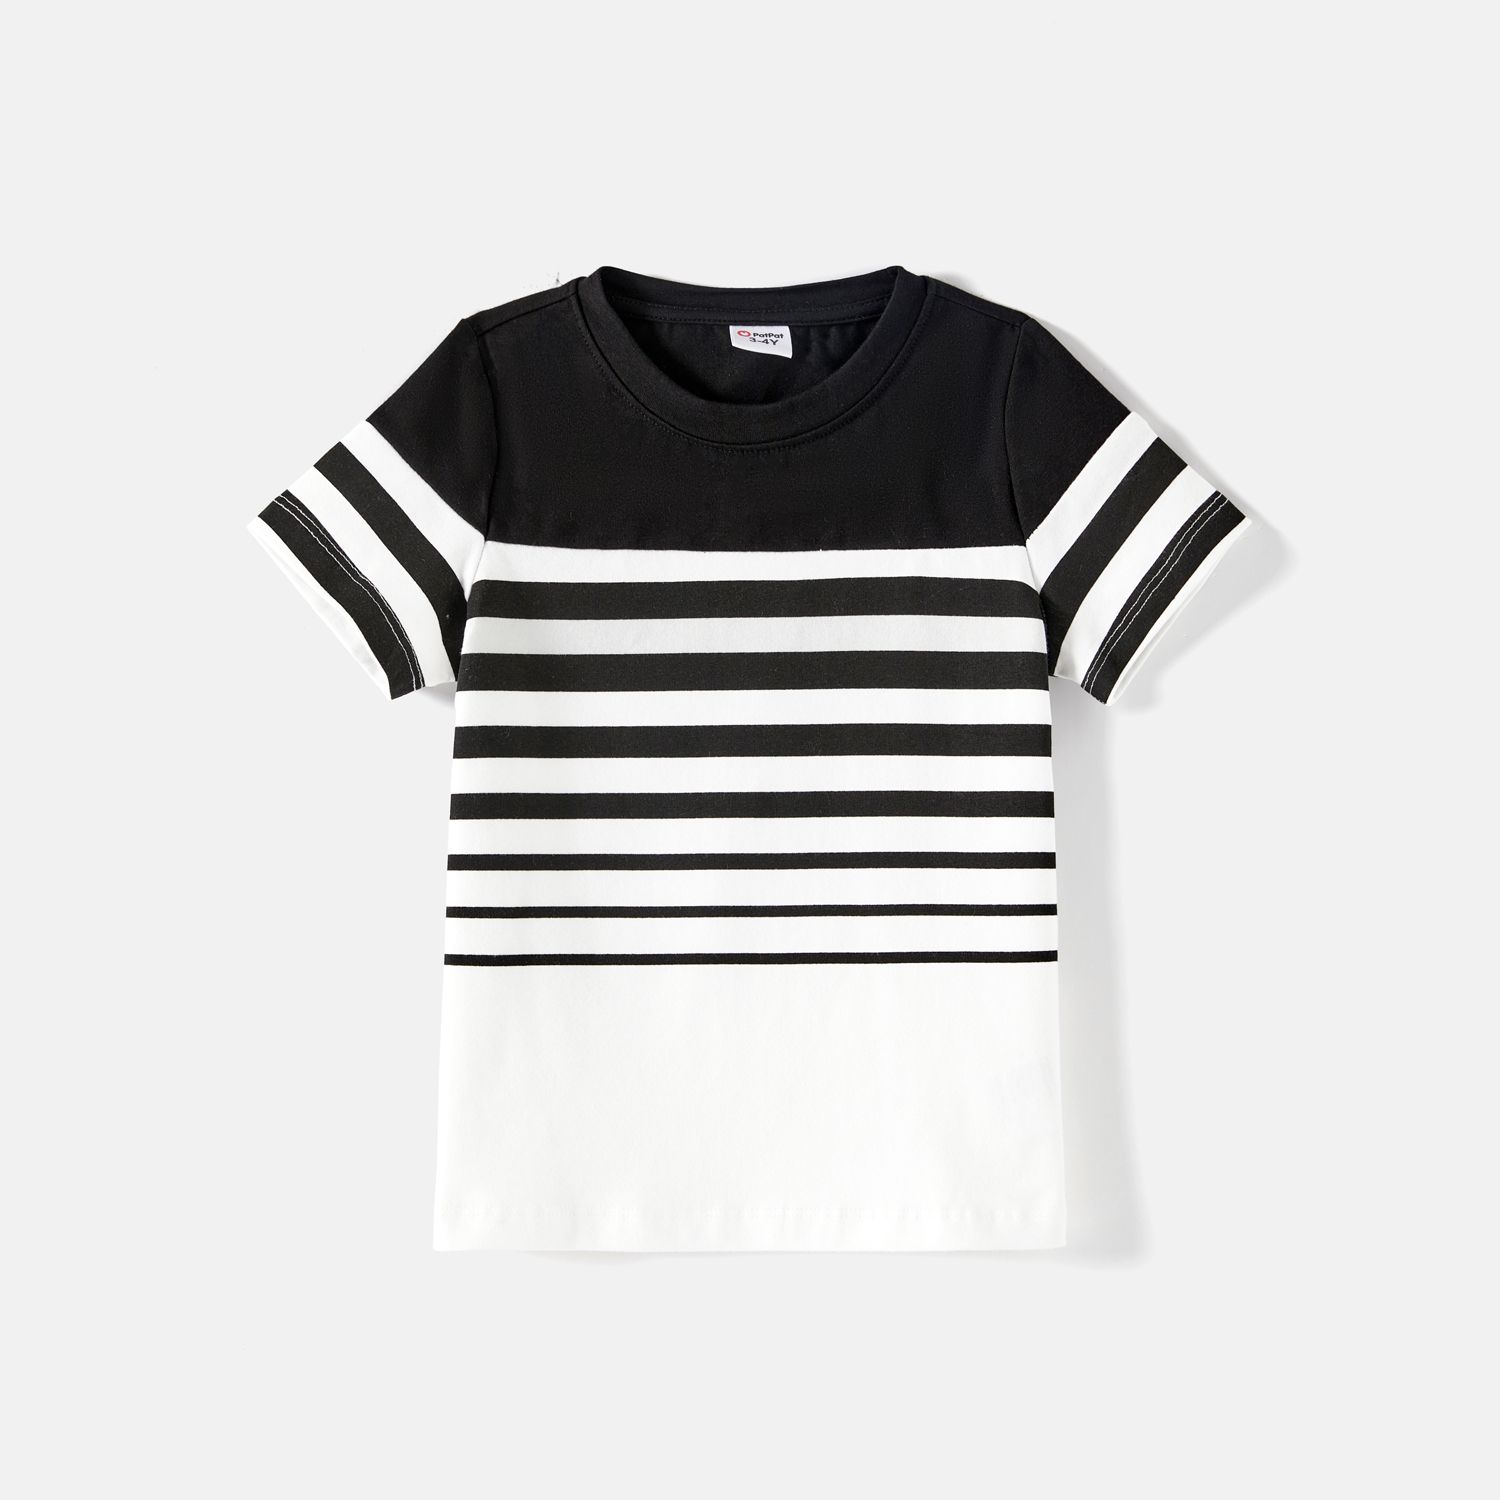 Family Matching Cotton Striped Short-sleeve T-shirts And Off Shoulder Belted Spliced Dresses Sets